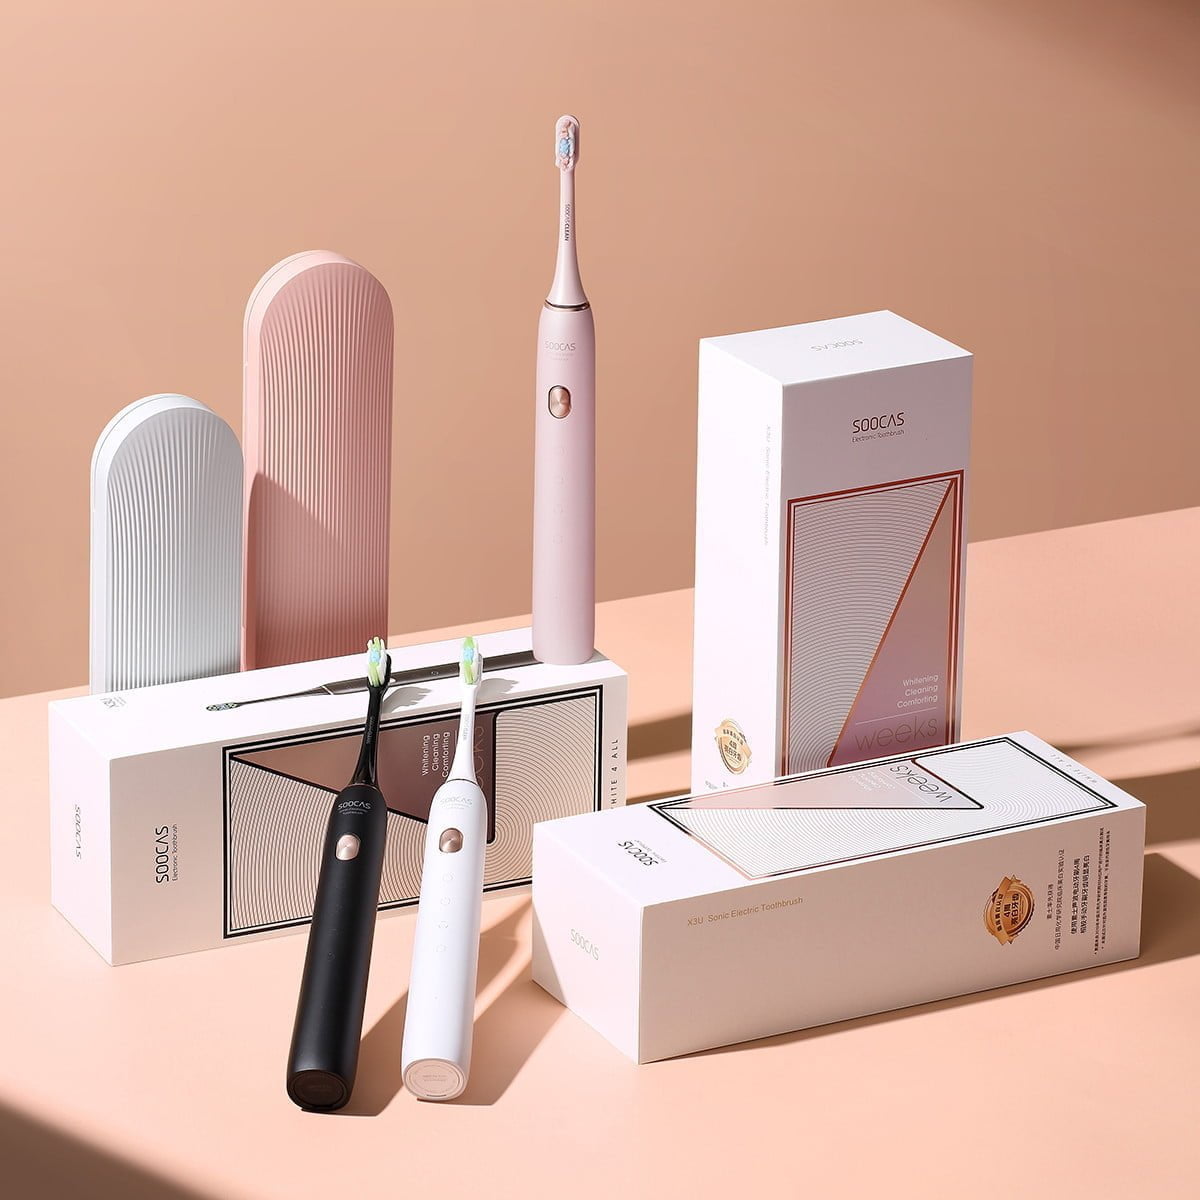 82E09C5C Ff7A 4Aee 9818 84Ef52B719D2 Xiaomi Xiaomi Toothbrush Soocare X3U, Soocas Upgraded Electric Sonic Vibration Waterproof Lightning-Fast Charging 2020 Newest Version [Video Width=&Quot;1280&Quot; Height=&Quot;720&Quot; Mp4=&Quot;Https://Lablaab.com/Wp-Content/Uploads/2020/05/Khn4Gzxy4Rcnwtethdd__Hd.mp4&Quot;][/Video] Soocas X3U Sonic Toothbrush Electric (White) 2020 Model